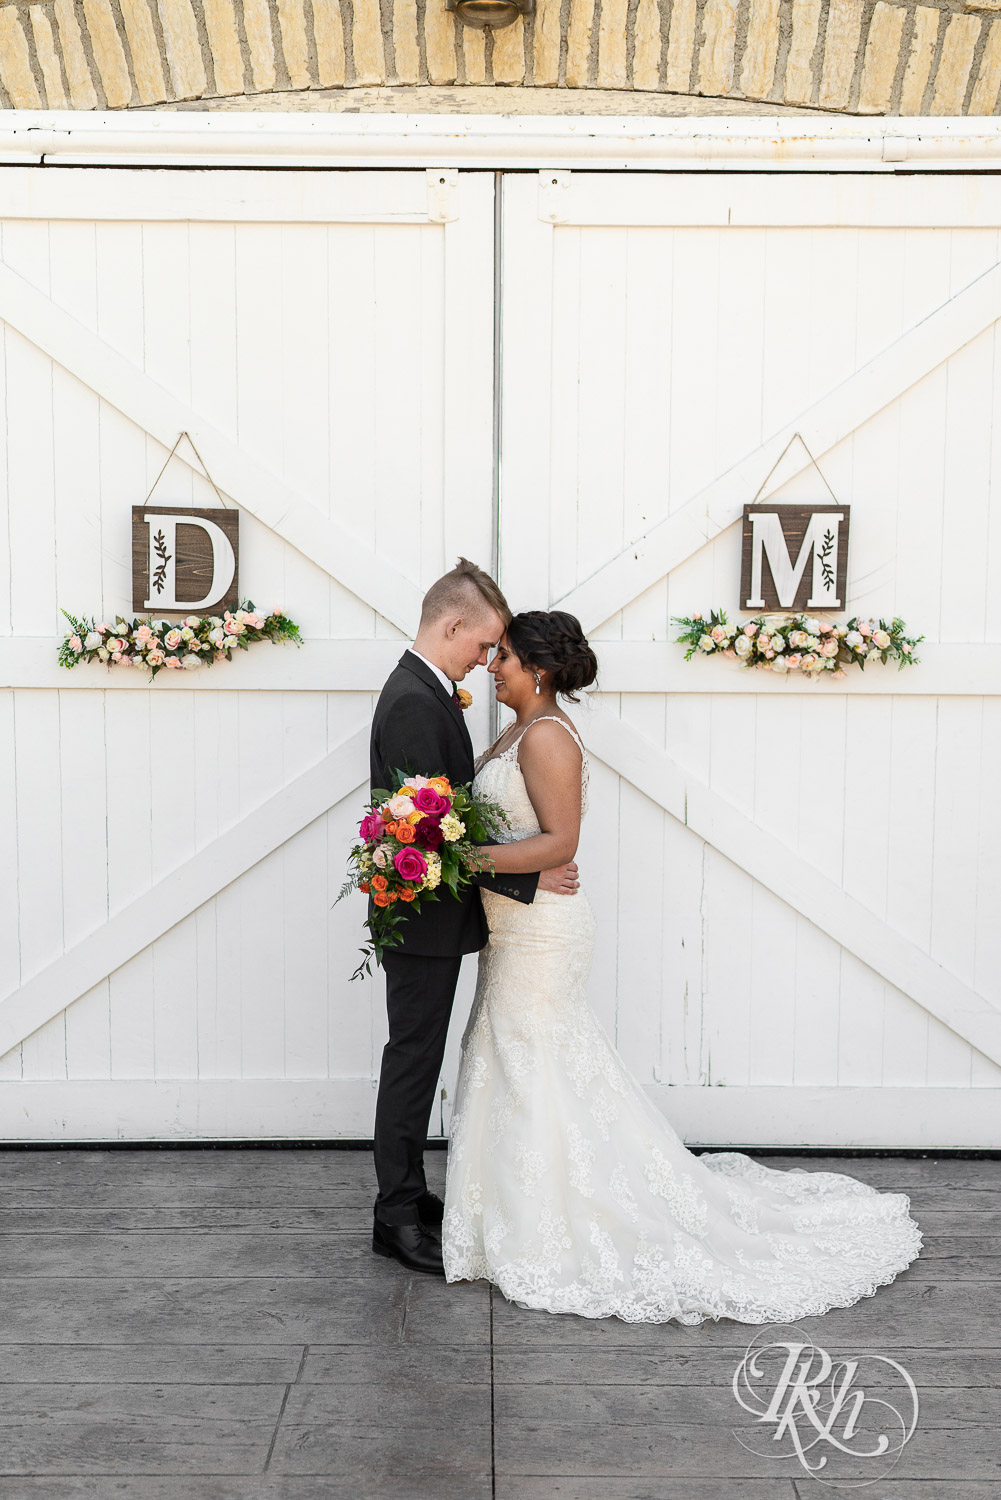 Bride and groom smiling in front of barn doors at wedding at Mayowood Stone Barn in Rochester, Minnesota.